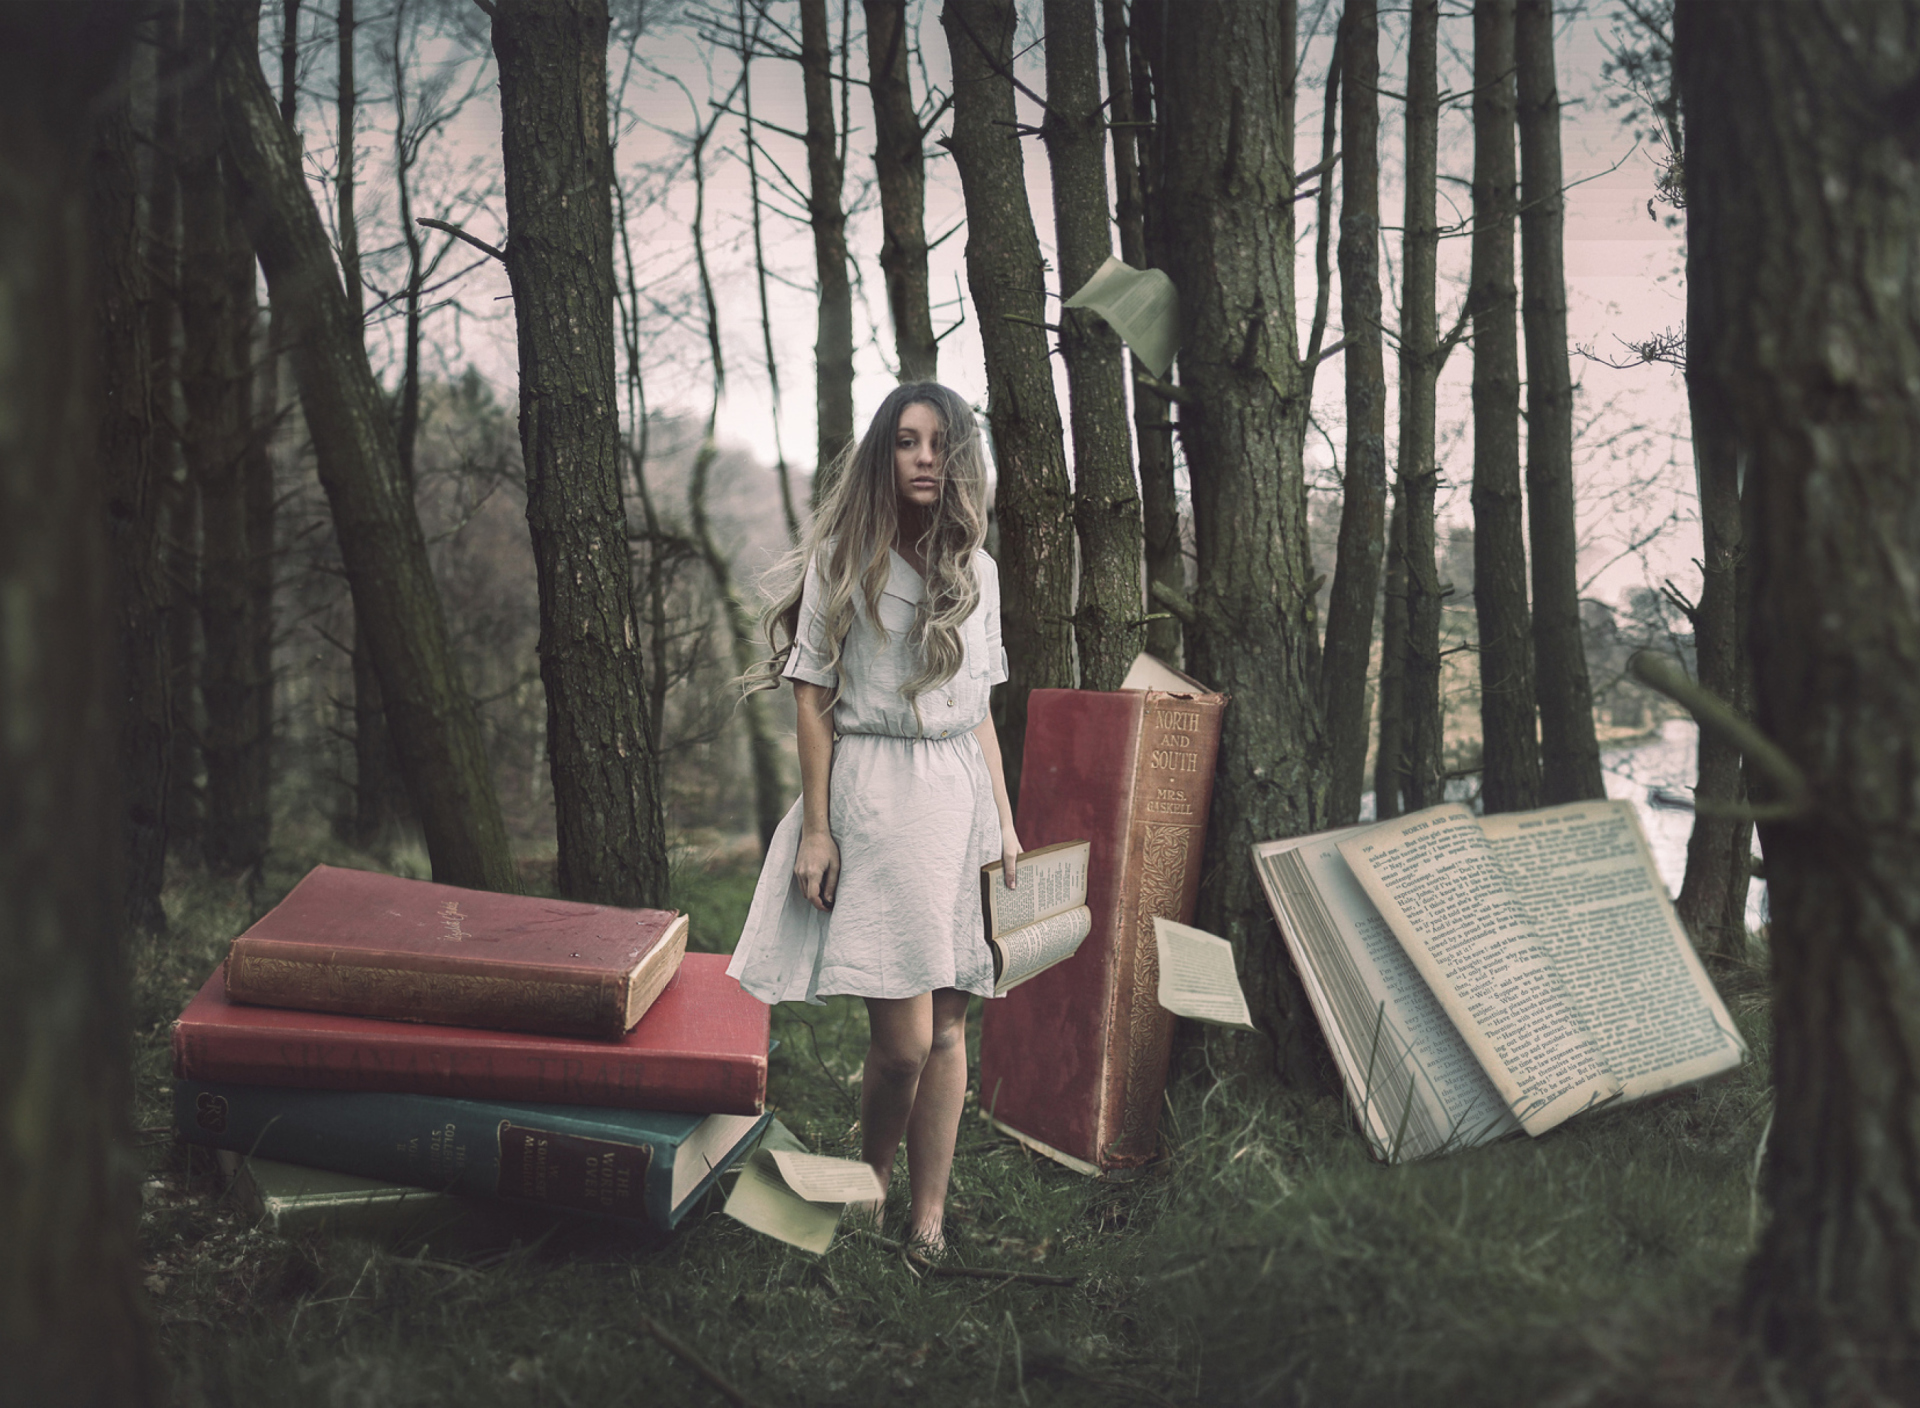 Forest Nymph Surrounded By Books wallpaper 1920x1408